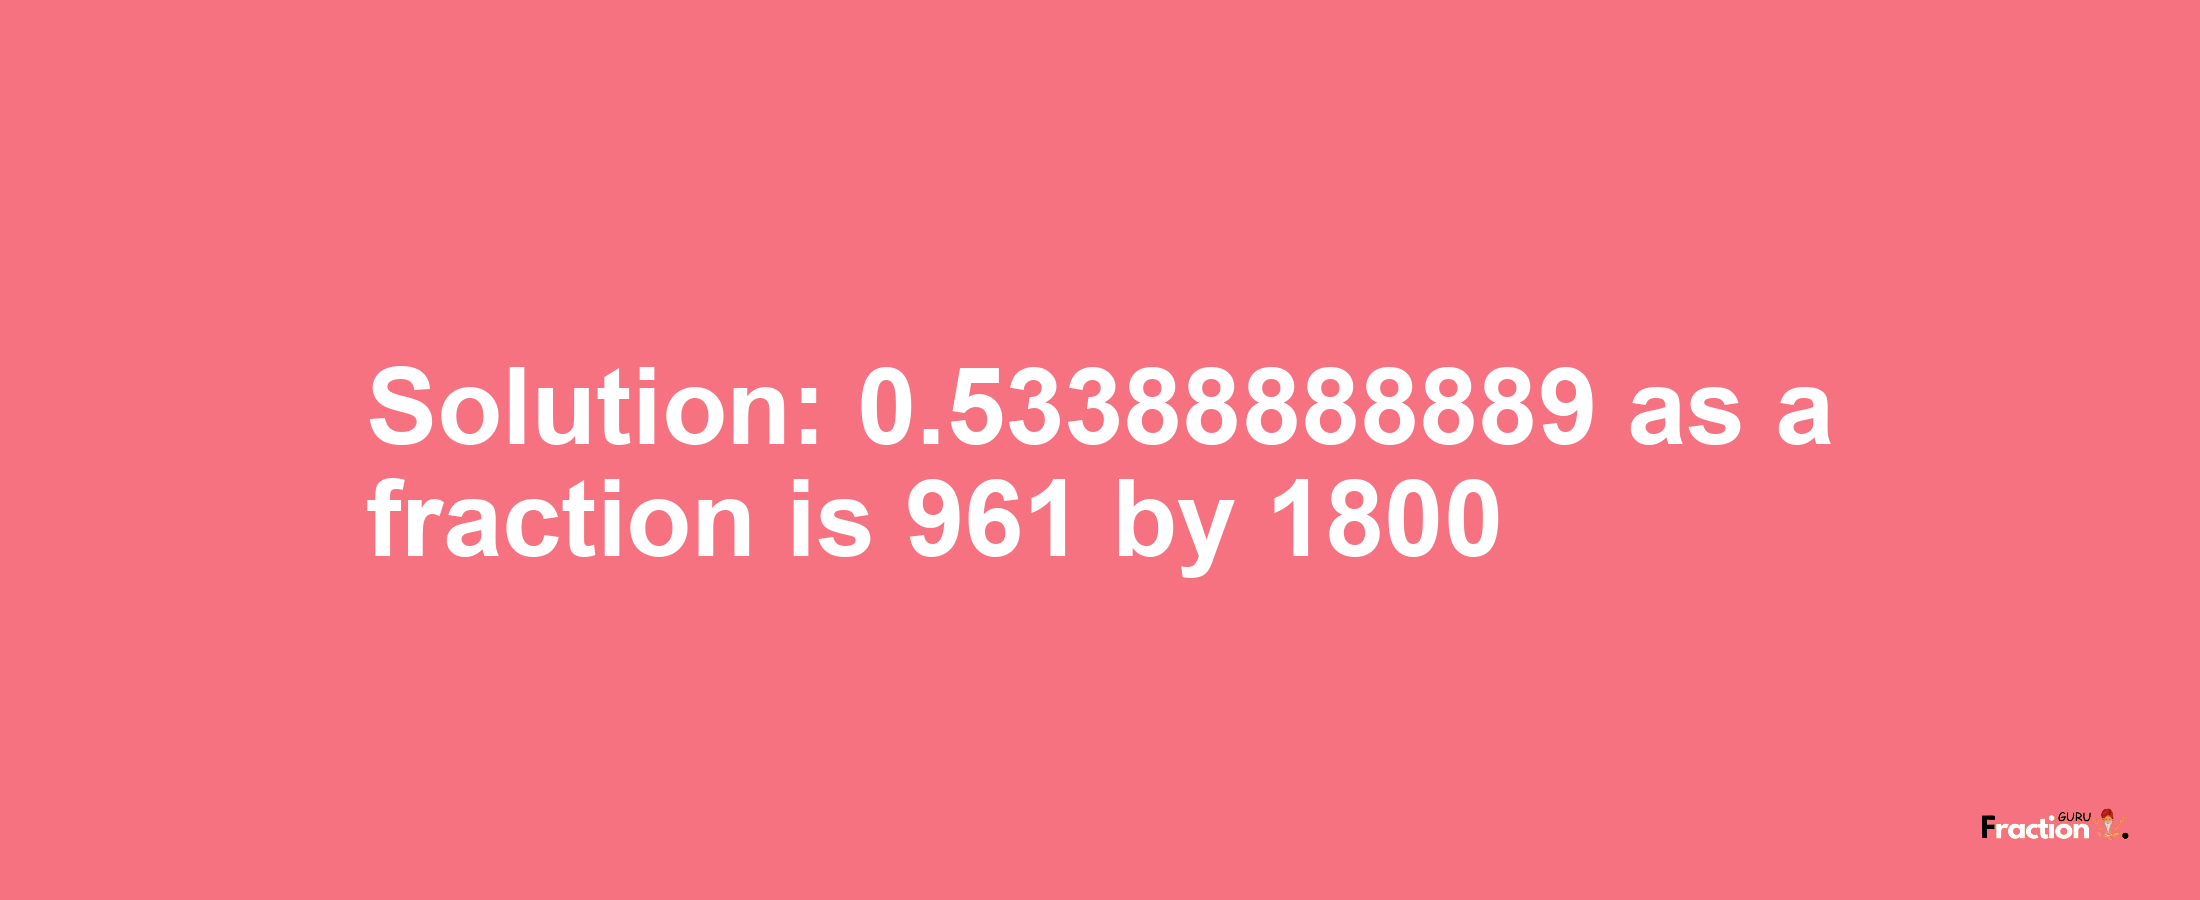 Solution:0.53388888889 as a fraction is 961/1800